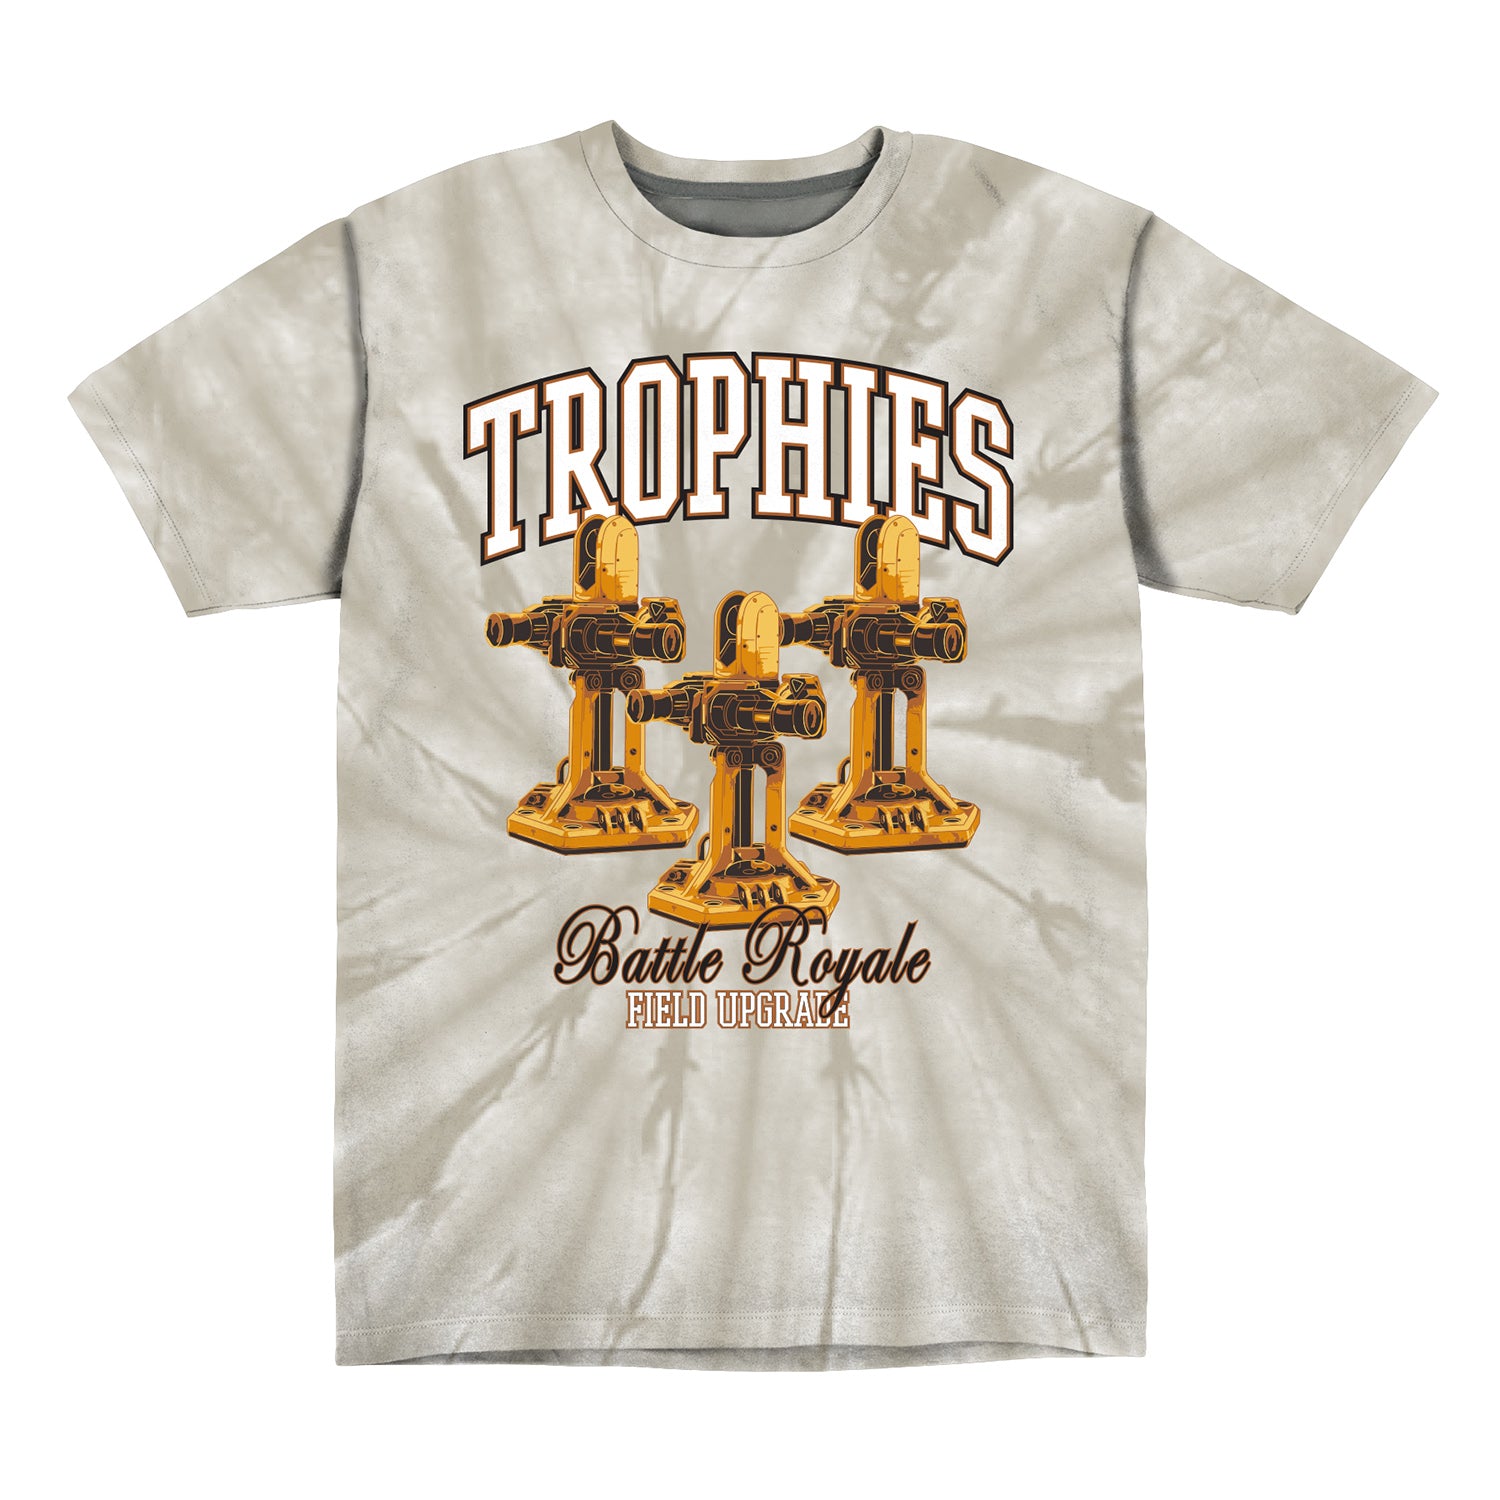 Call of Duty Trophies Grey Tie-Dye T-Shirt - Front View